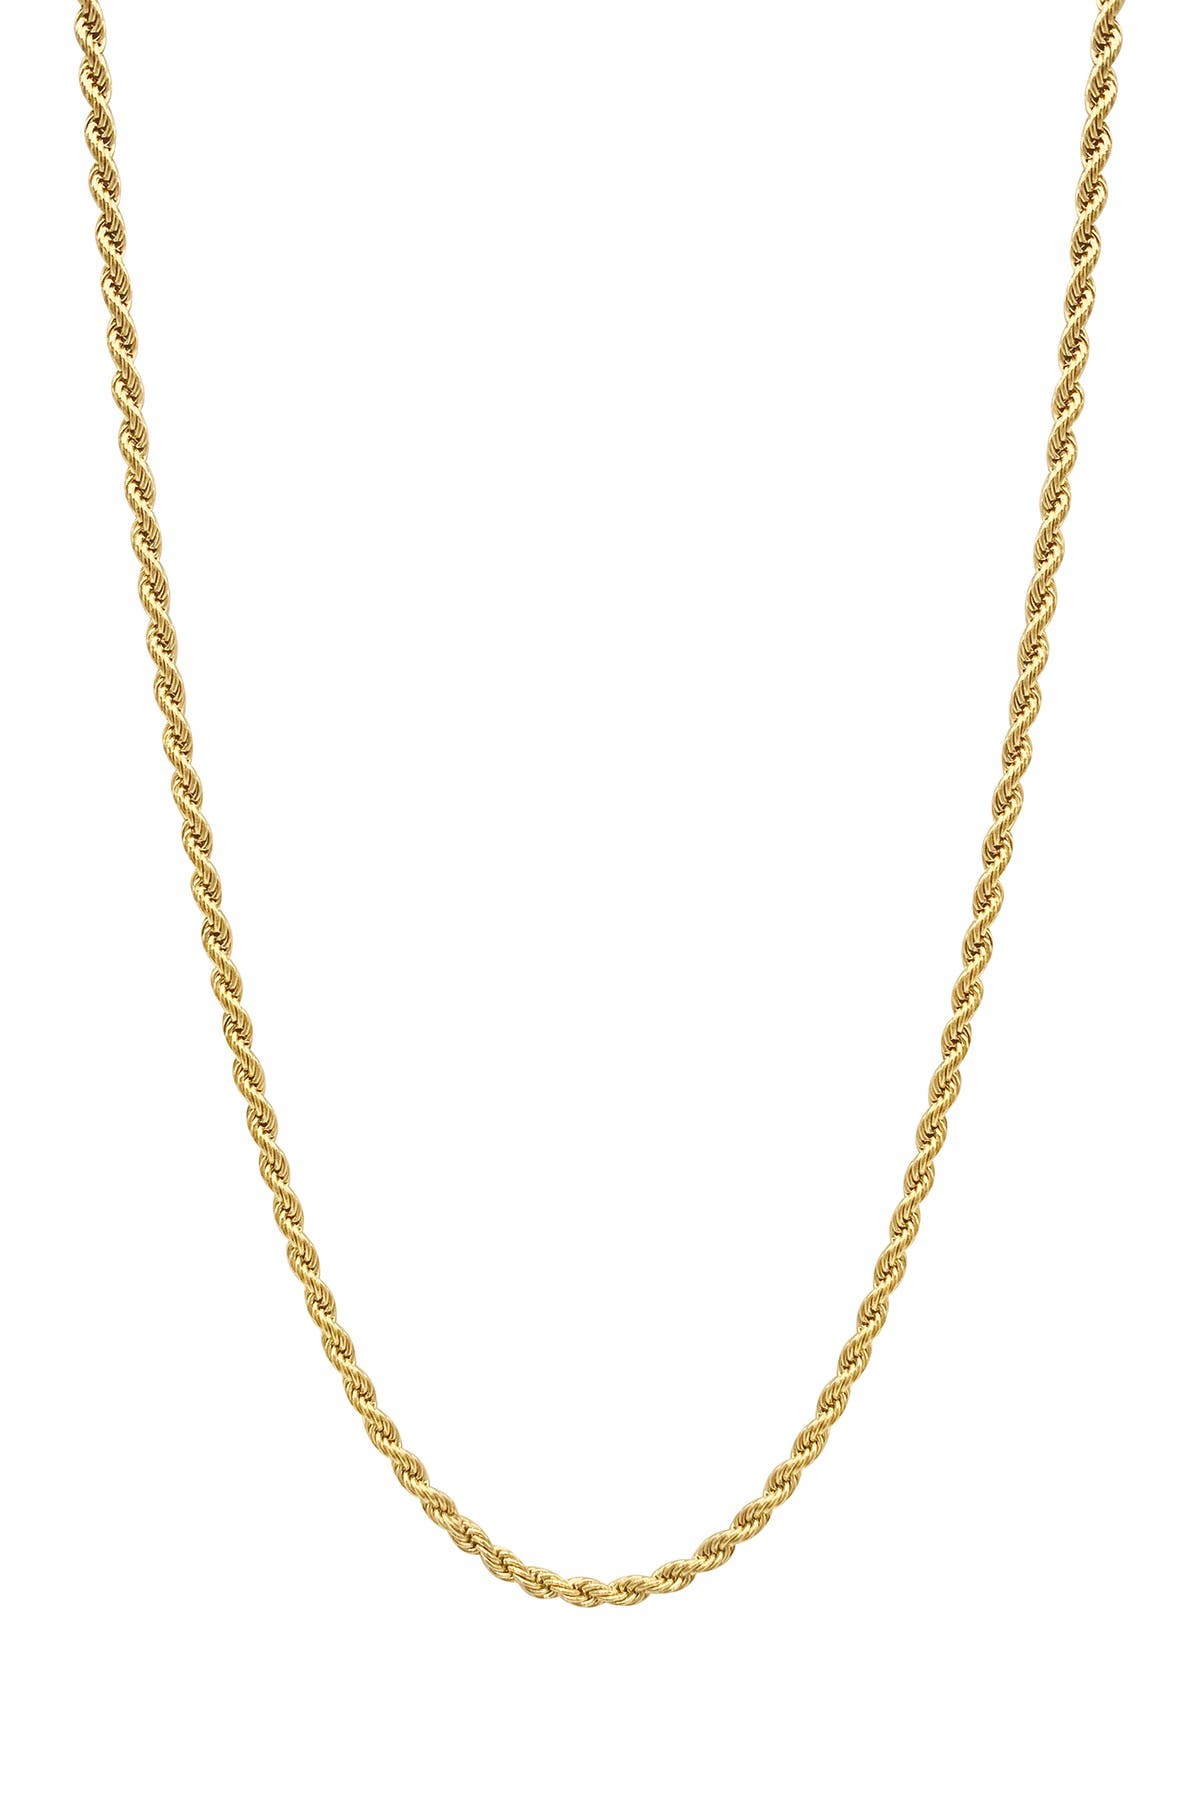 Adornia 2.5mm Rope Chain In Yellow